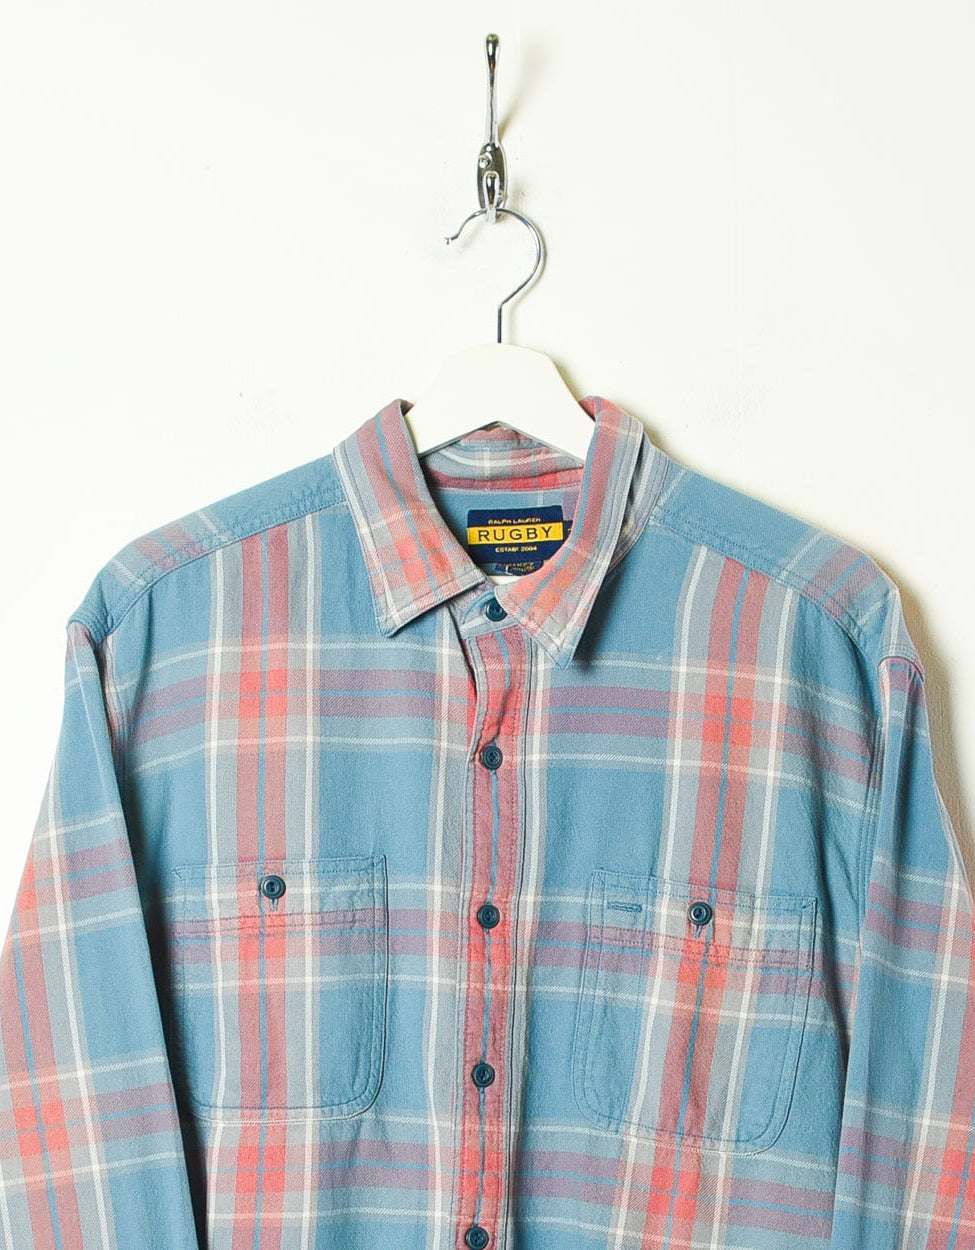 Baby Polo Ralph Lauren Rugby Flannel Shirt - X-Large